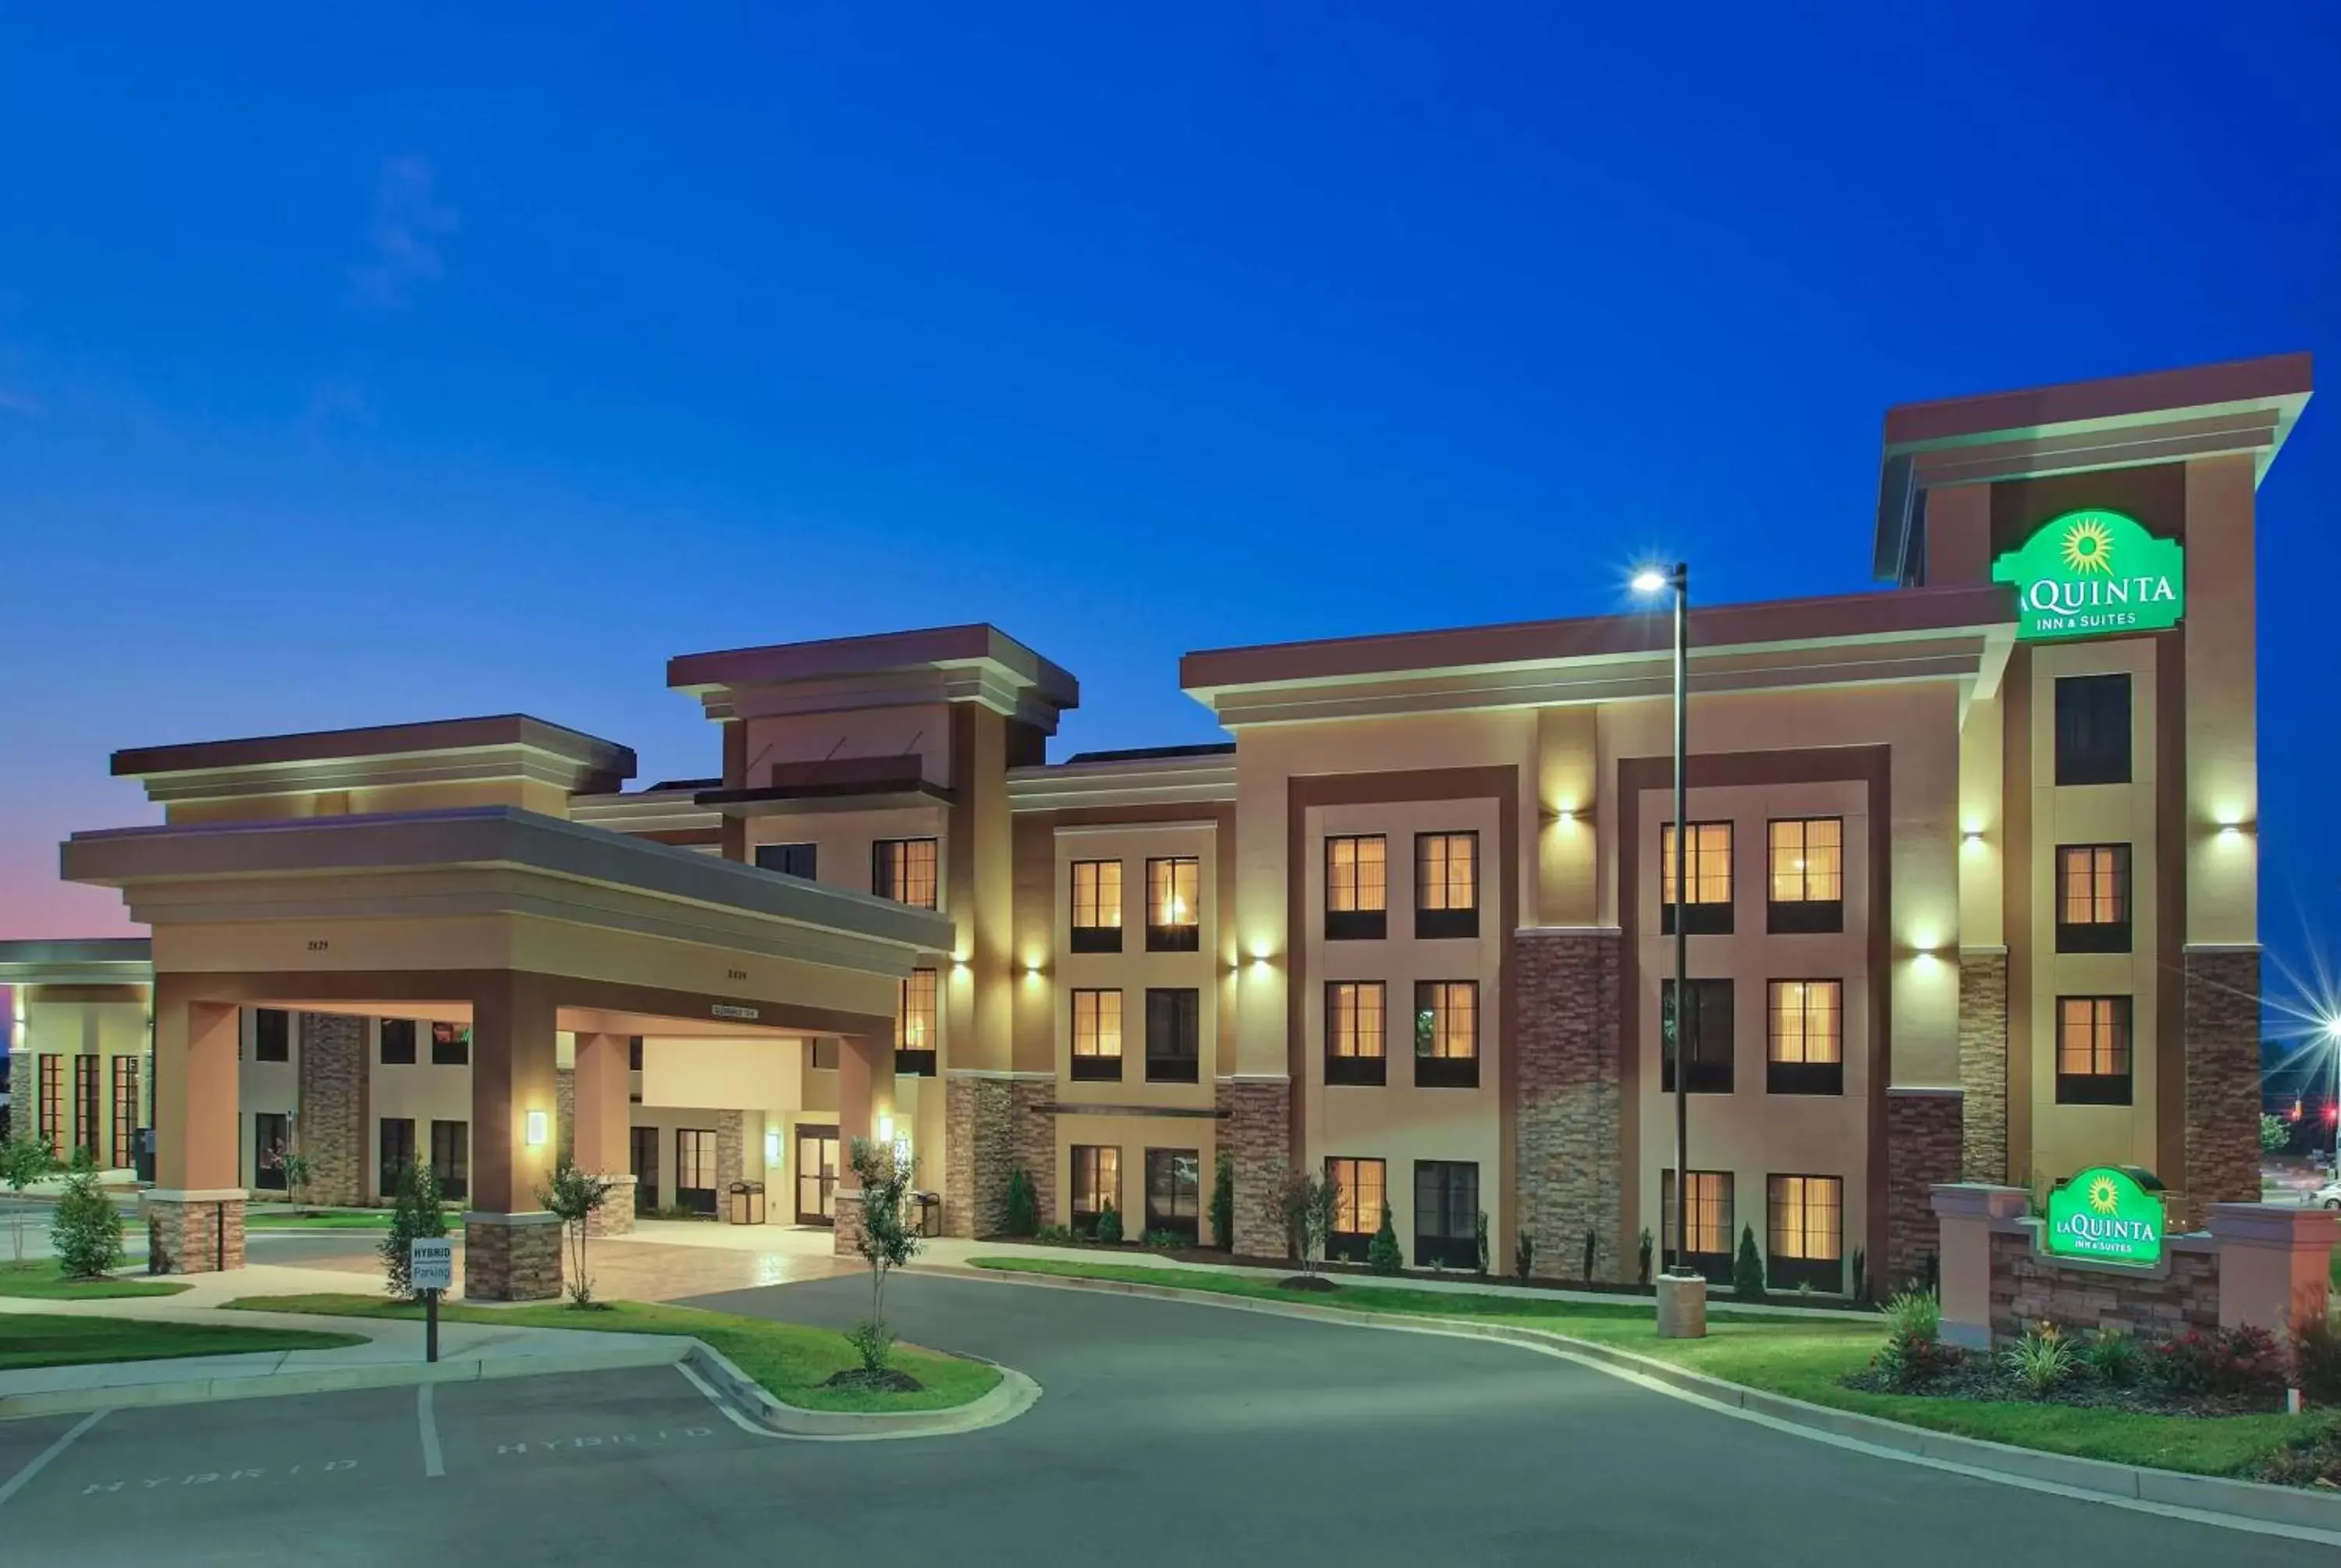 Property Building in La Quinta by Wyndham Memphis Wolfchase